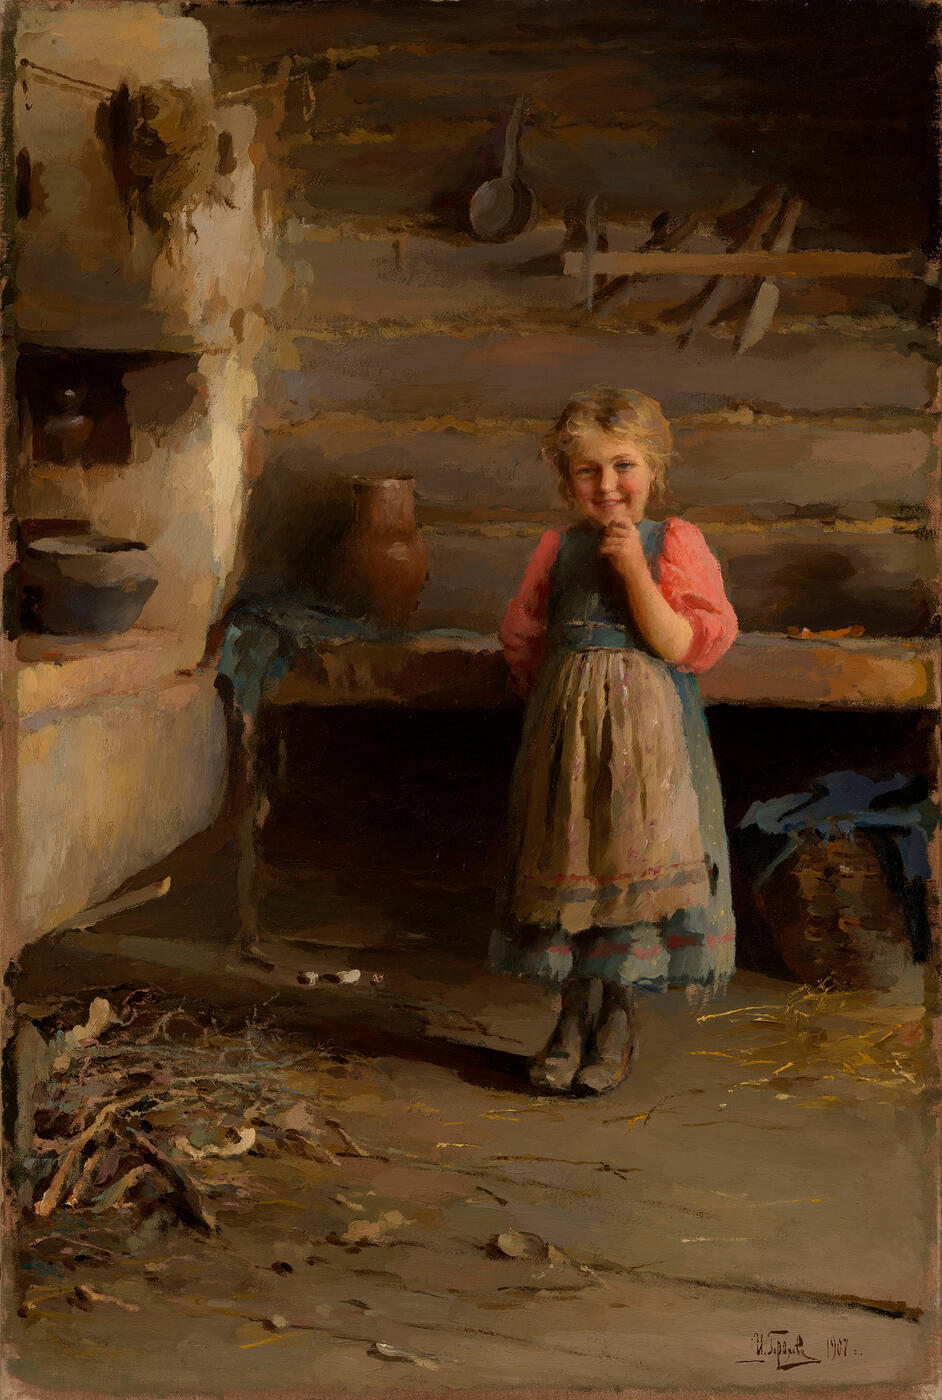 Peasant Girl by the Stove